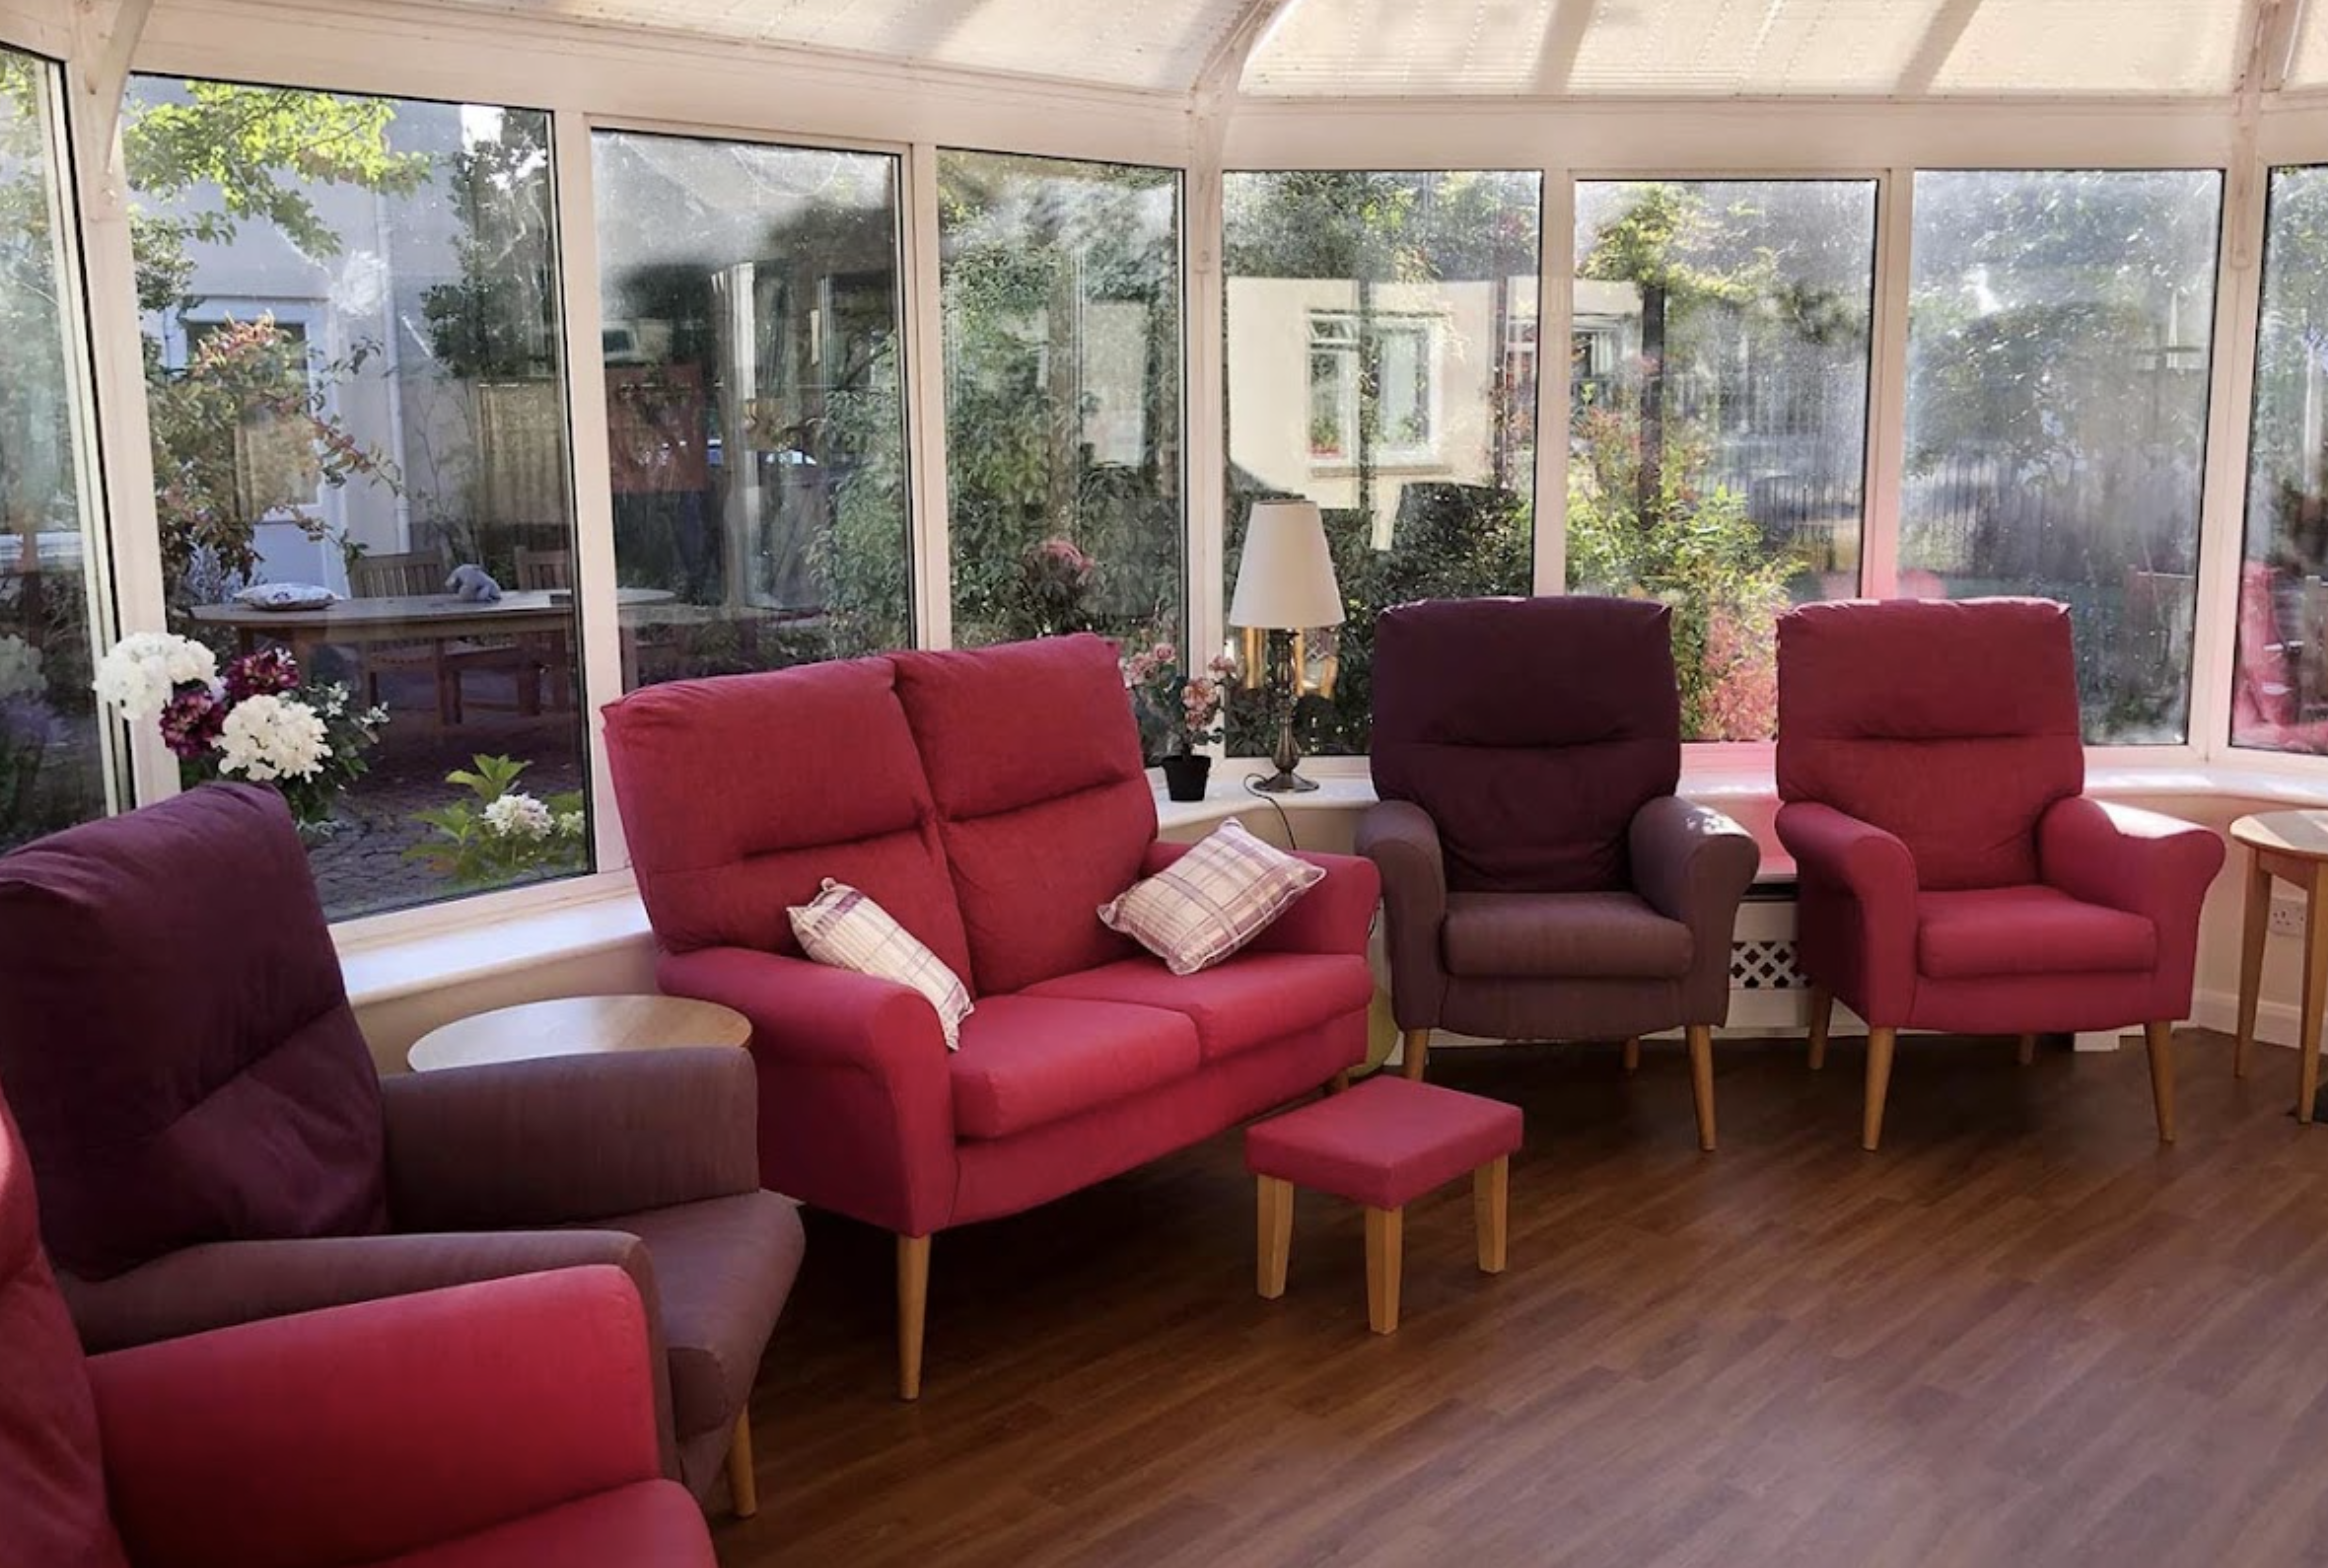 Conservatory of Elizabeth House care home in Poole, Hampshire